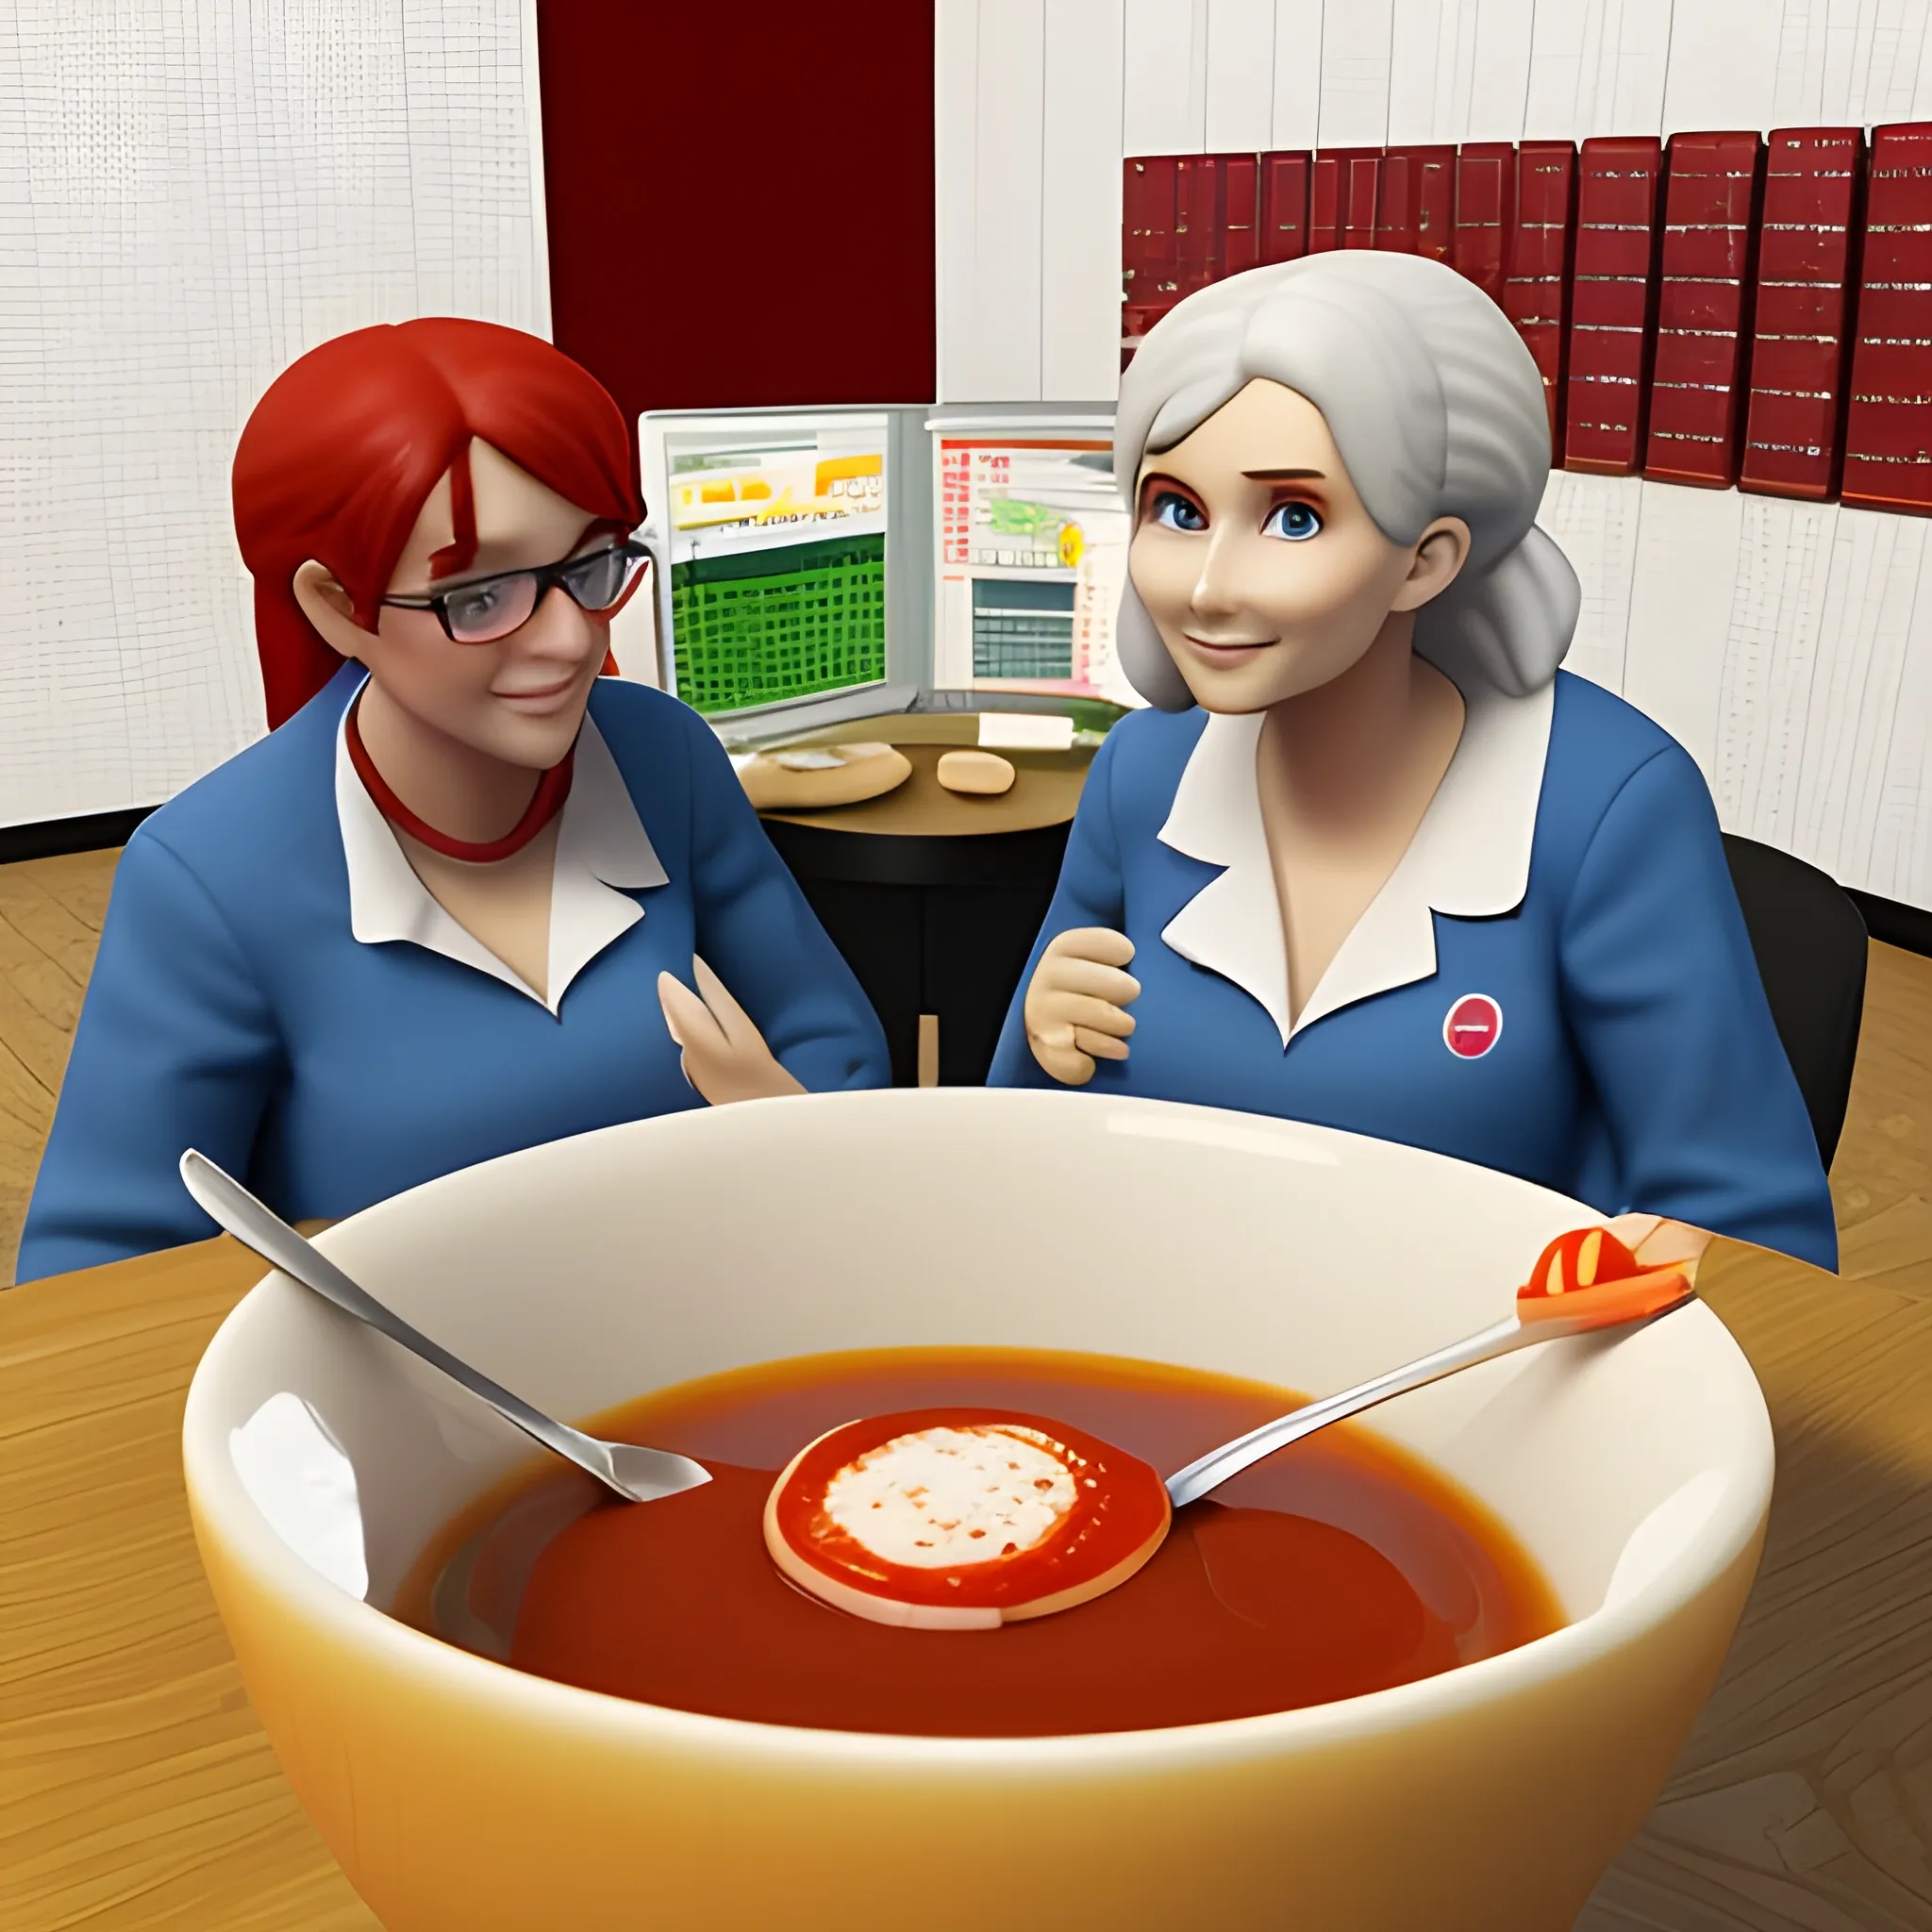 a picture of computer servers with your mom and ash ketchup eating soup
, 3D